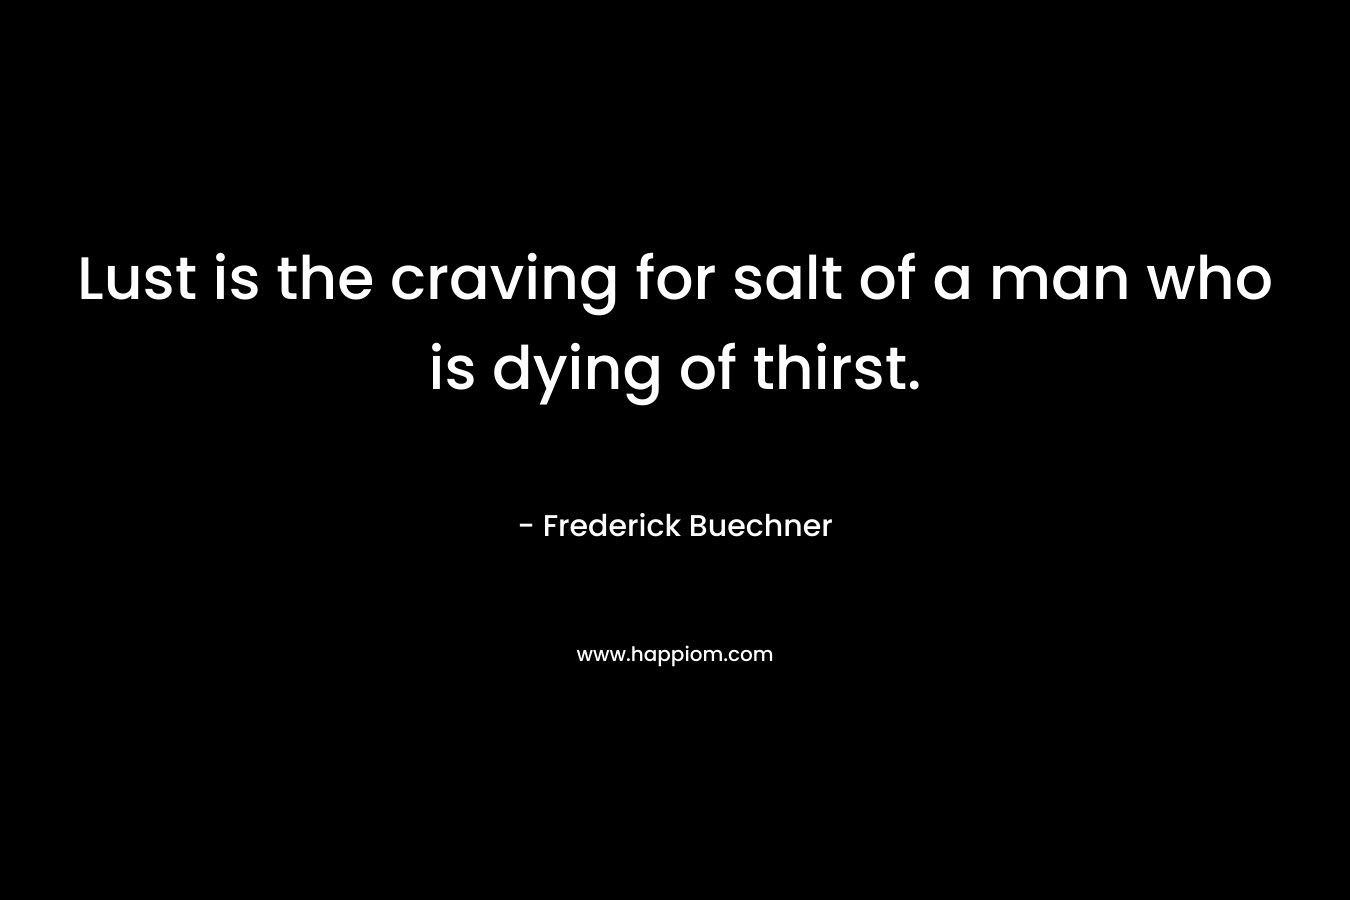 Lust is the craving for salt of a man who is dying of thirst.